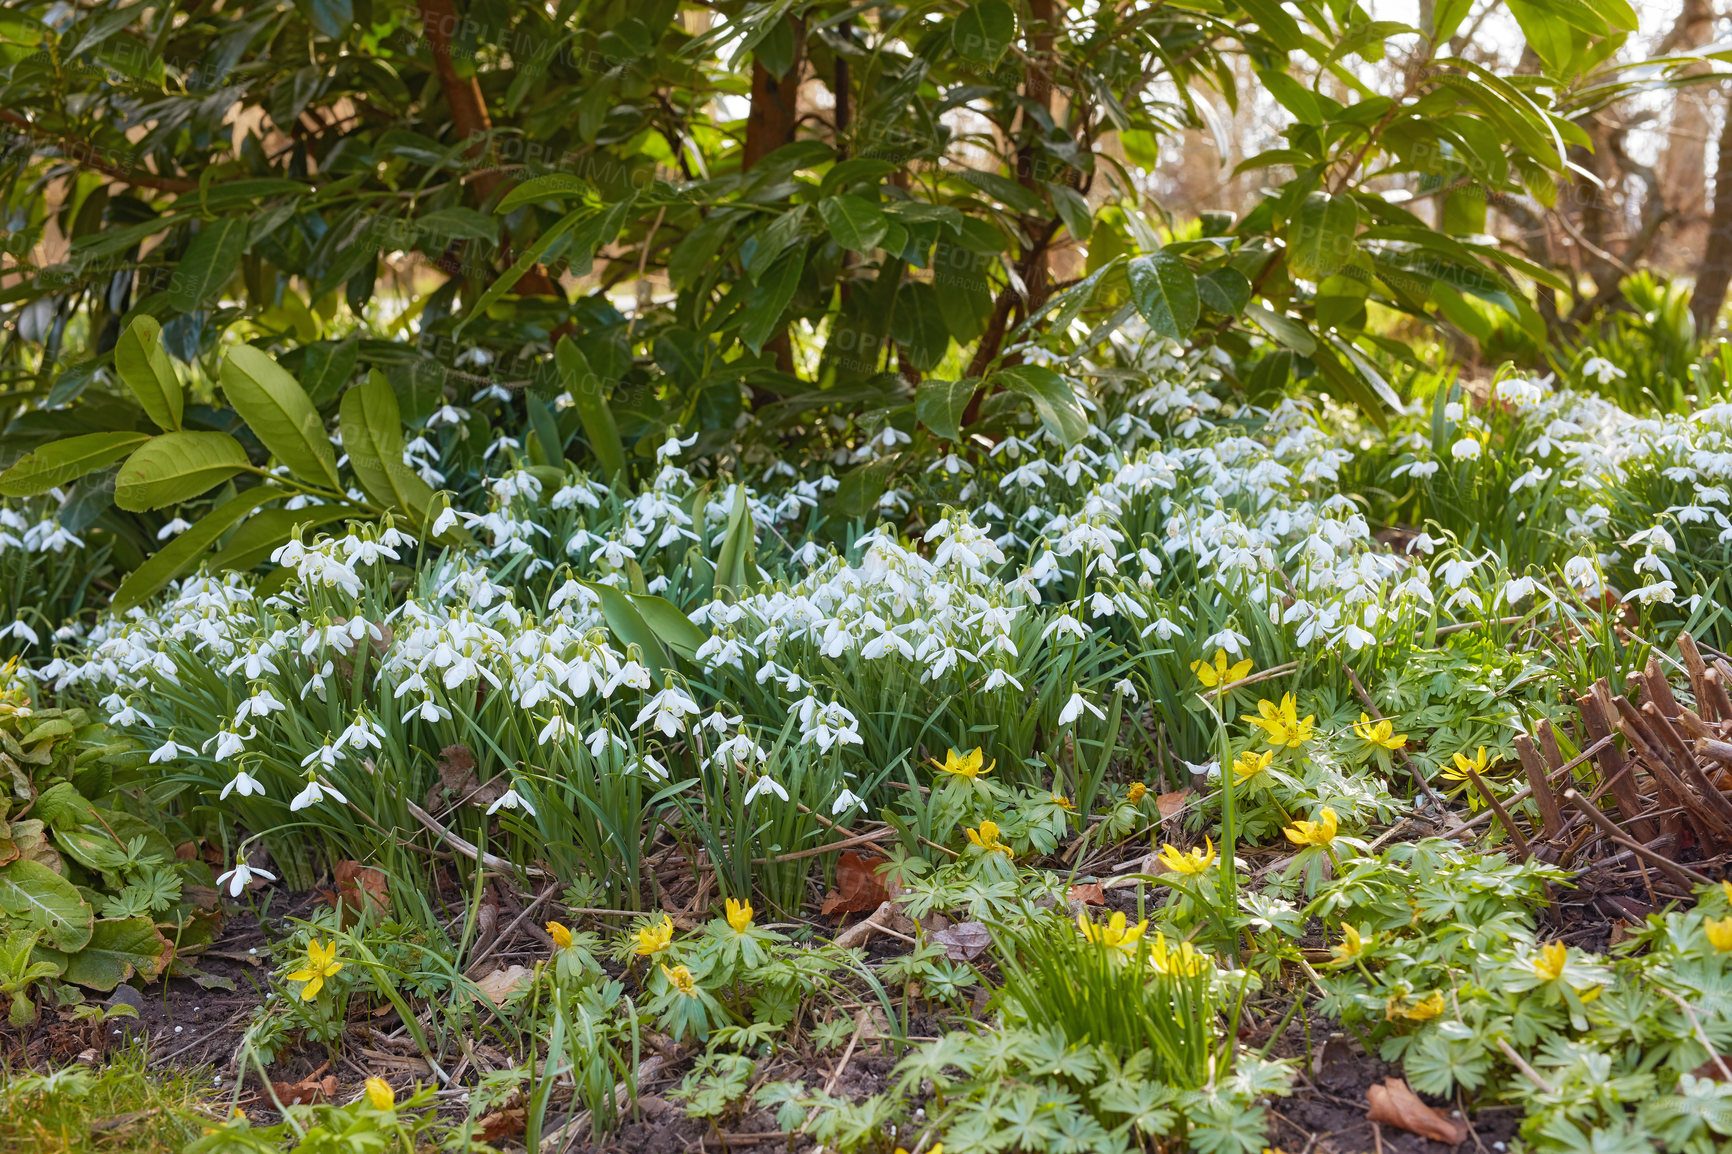 Buy stock photo Closeup of white common snowdrop and yellow starburst flowers growing in lush green flowerbed in a landscaped home garden. Group of galanthus nivalis blossoming, blooming and flowering in a backyard
